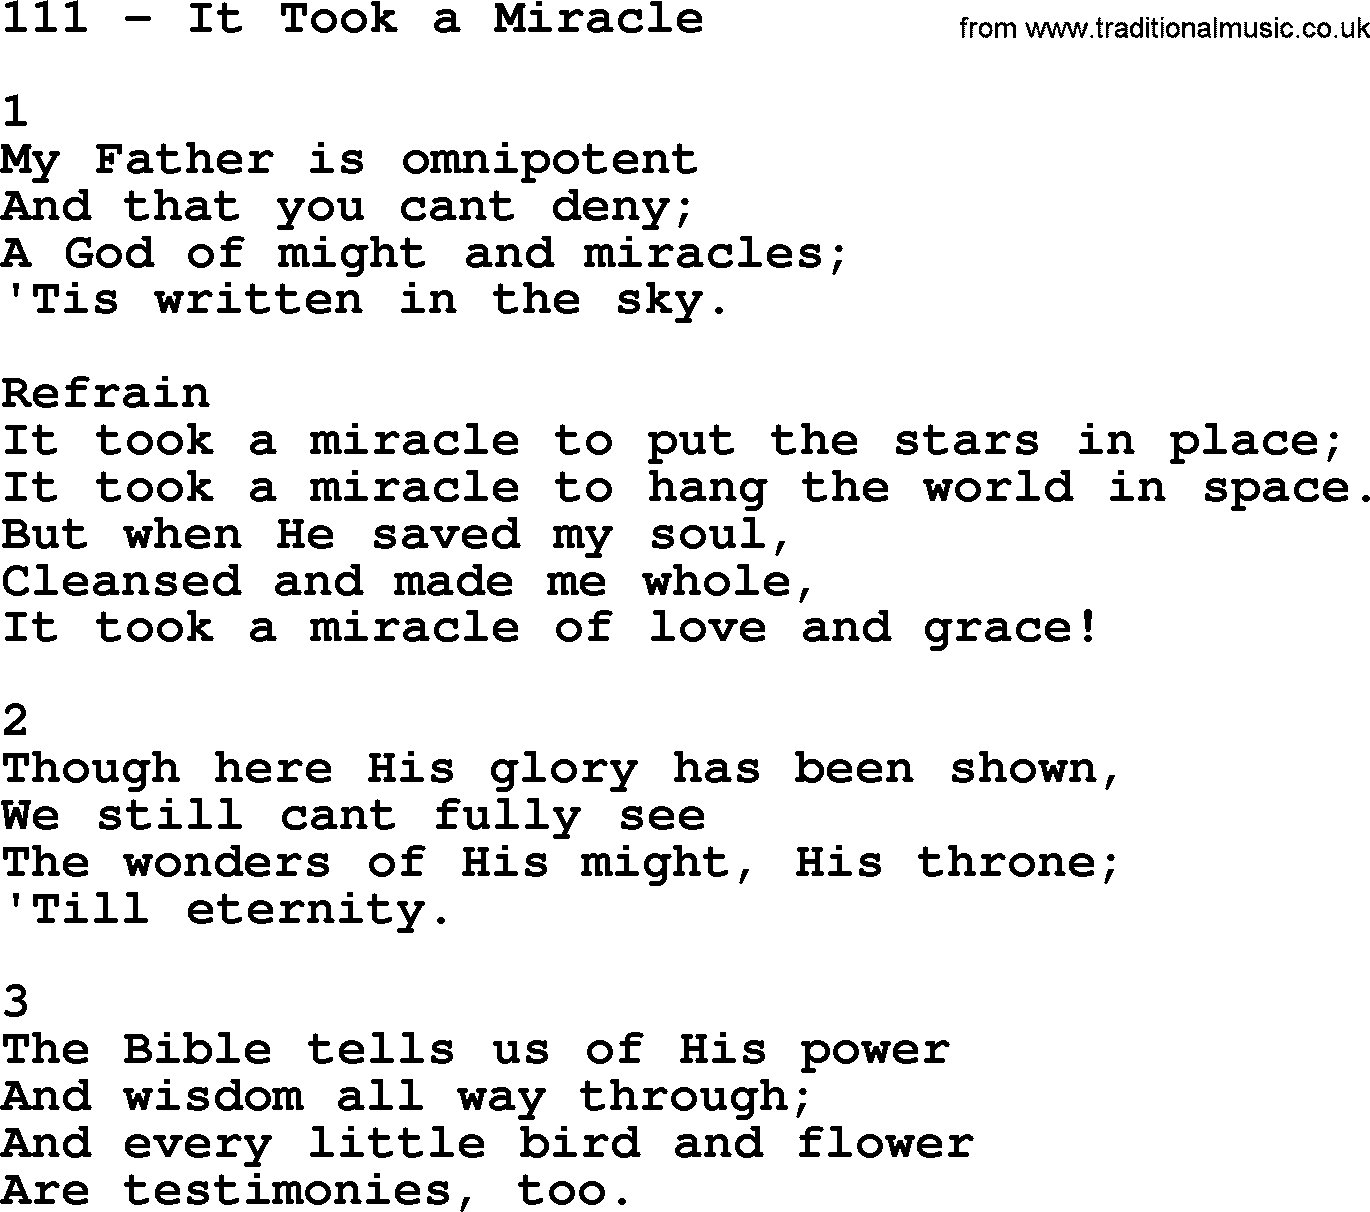 Complete Adventis Hymnal, title: 111-It Took A Miracle, with lyrics, midi, mp3, powerpoints(PPT) and PDF,